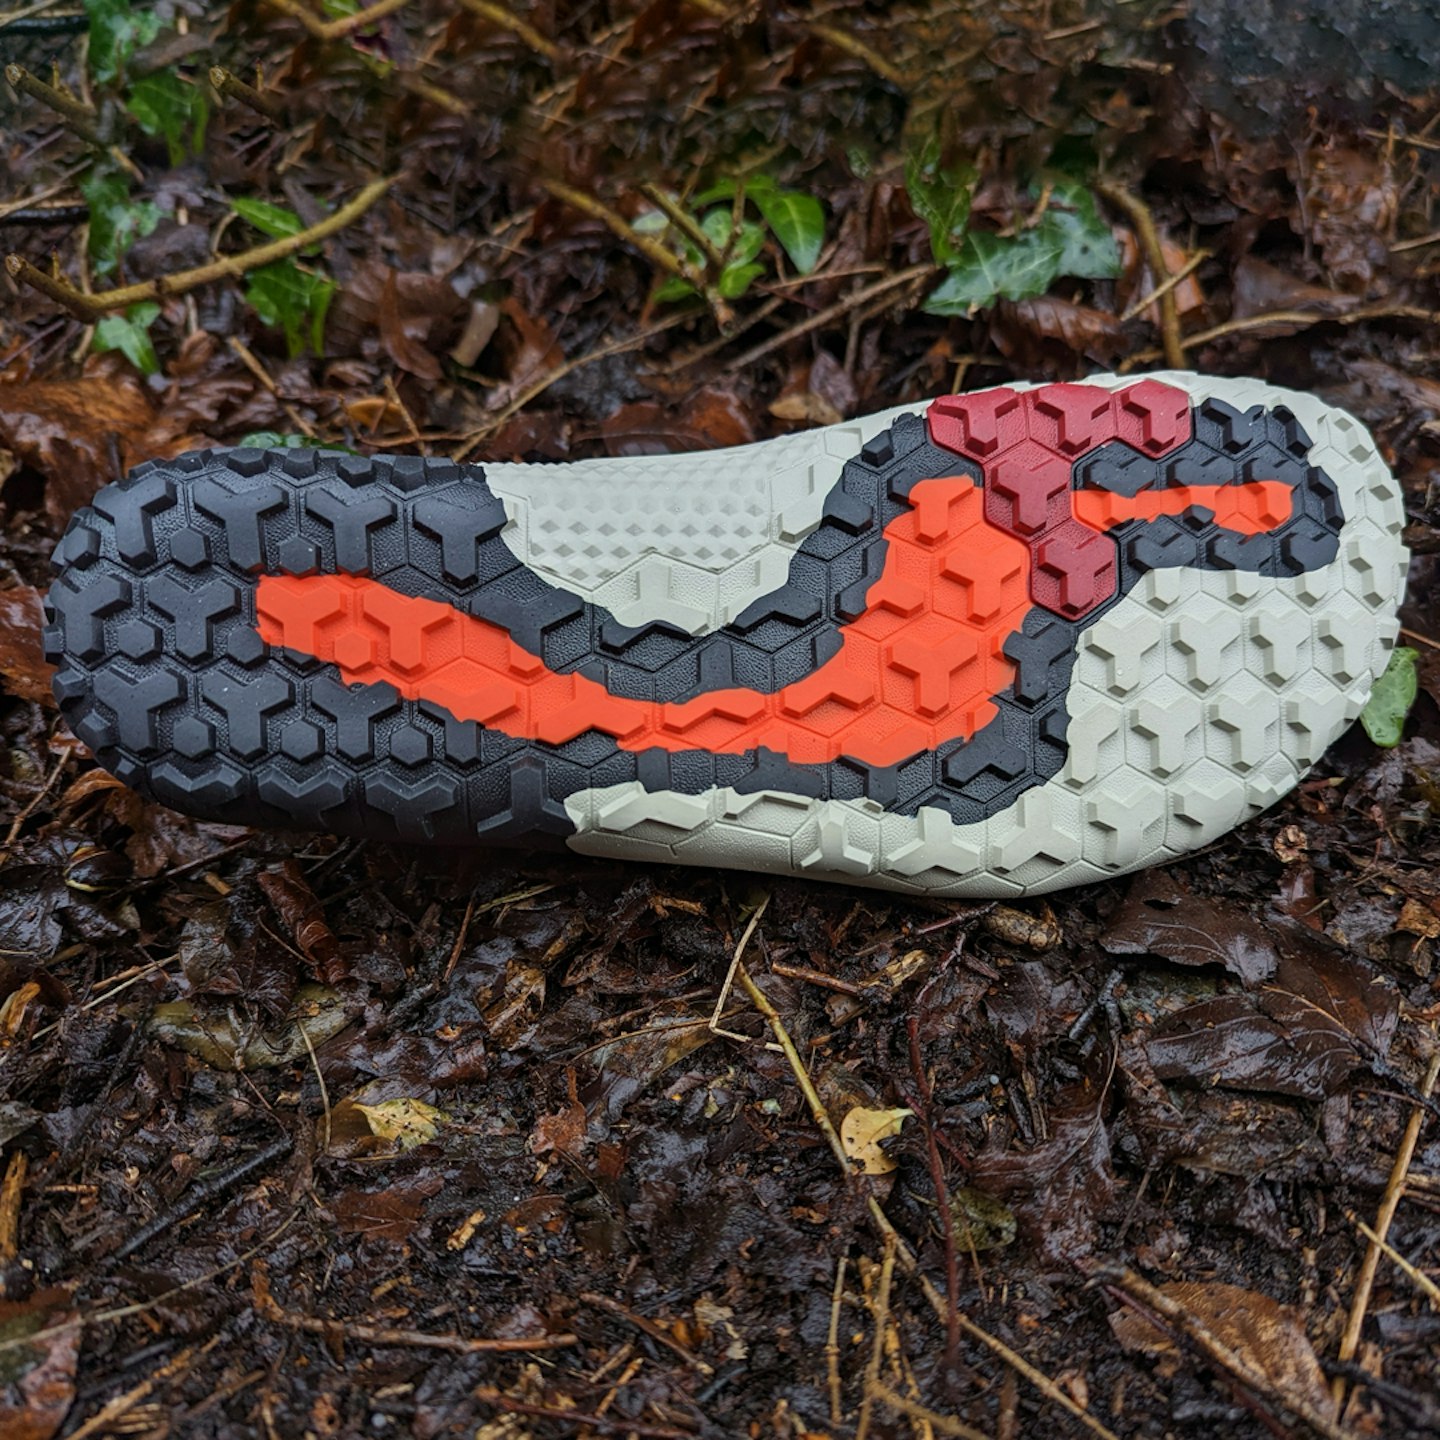 lugs under the Vivobarefoot Primus Trail III All Weather minimalist trailrunning shoes